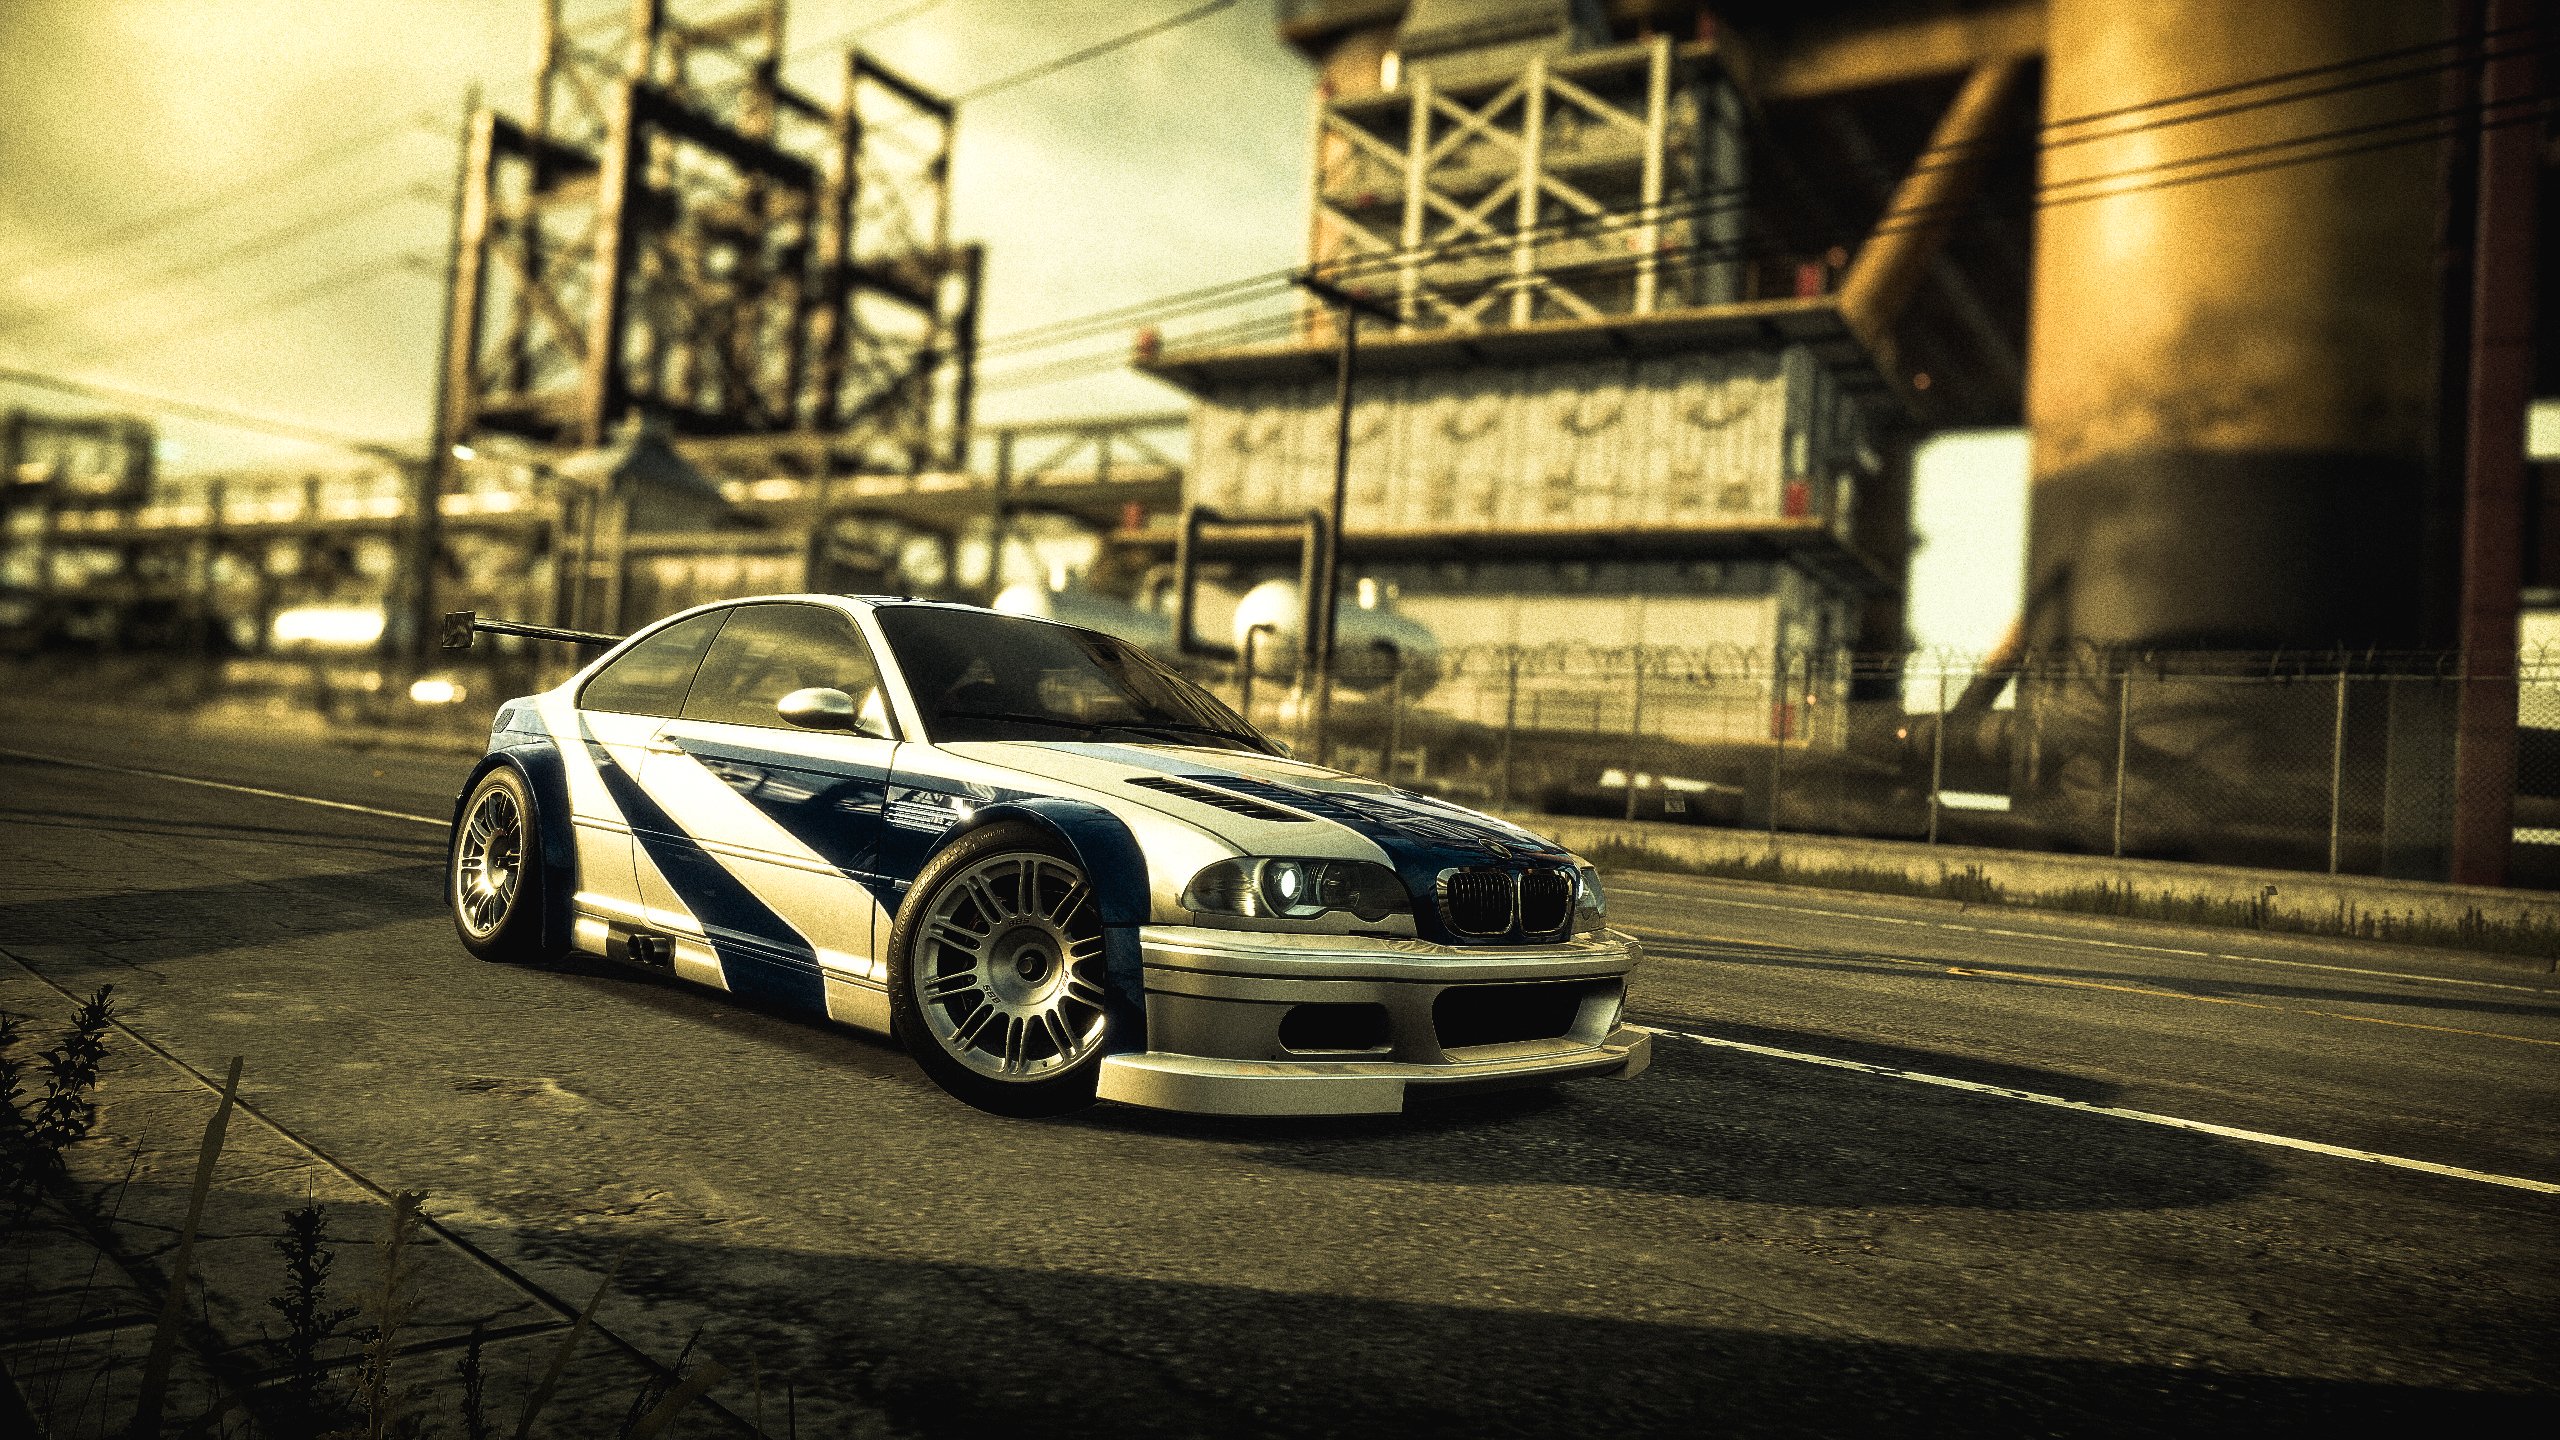 Nfs most wanted 2012 стим фото 52